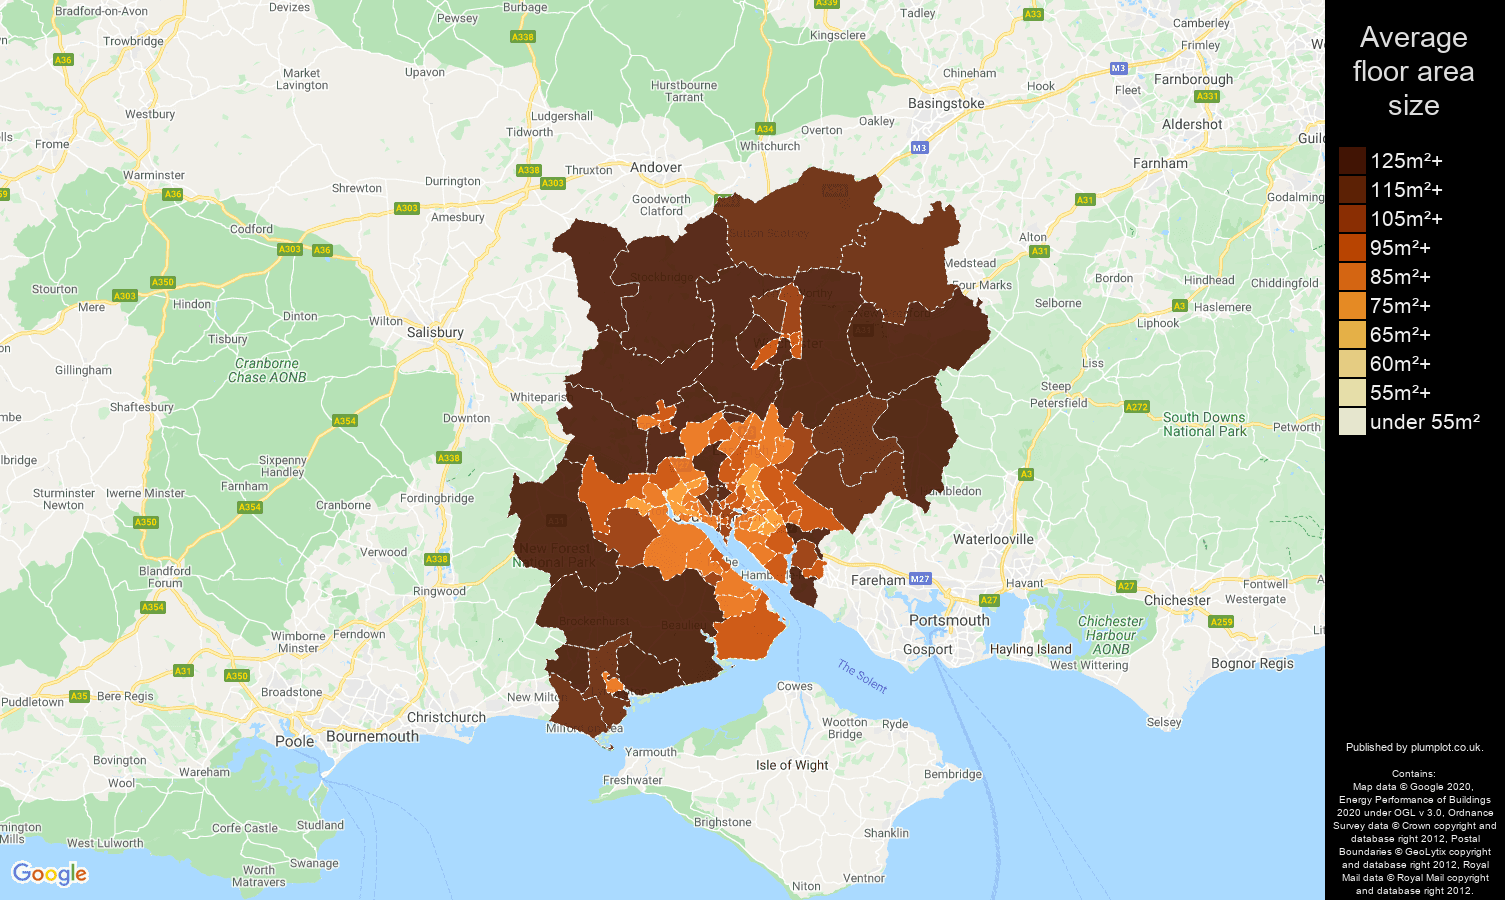 Southampton map of average floor area size of houses